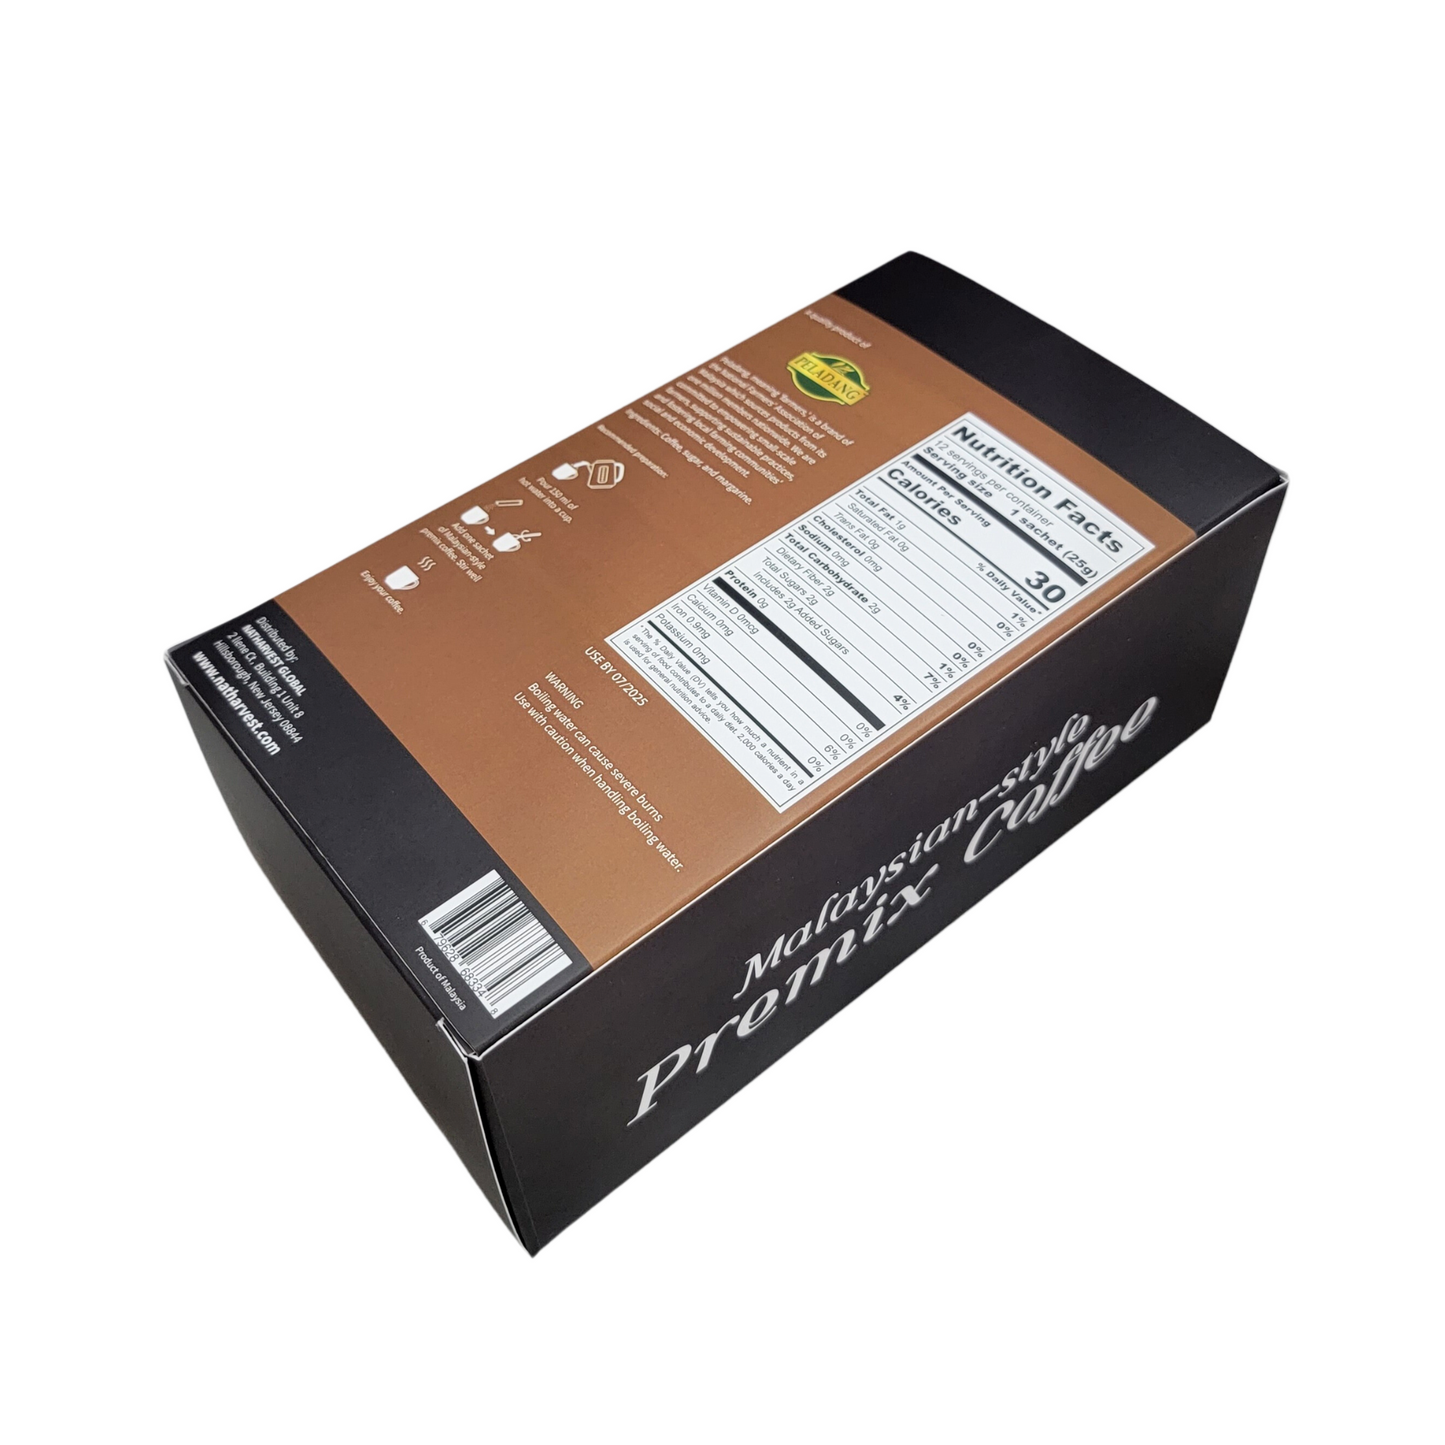 Natharvest Instant Premix Coffee, 2-in-1 with sugar, (10.5 oz) 300 gm